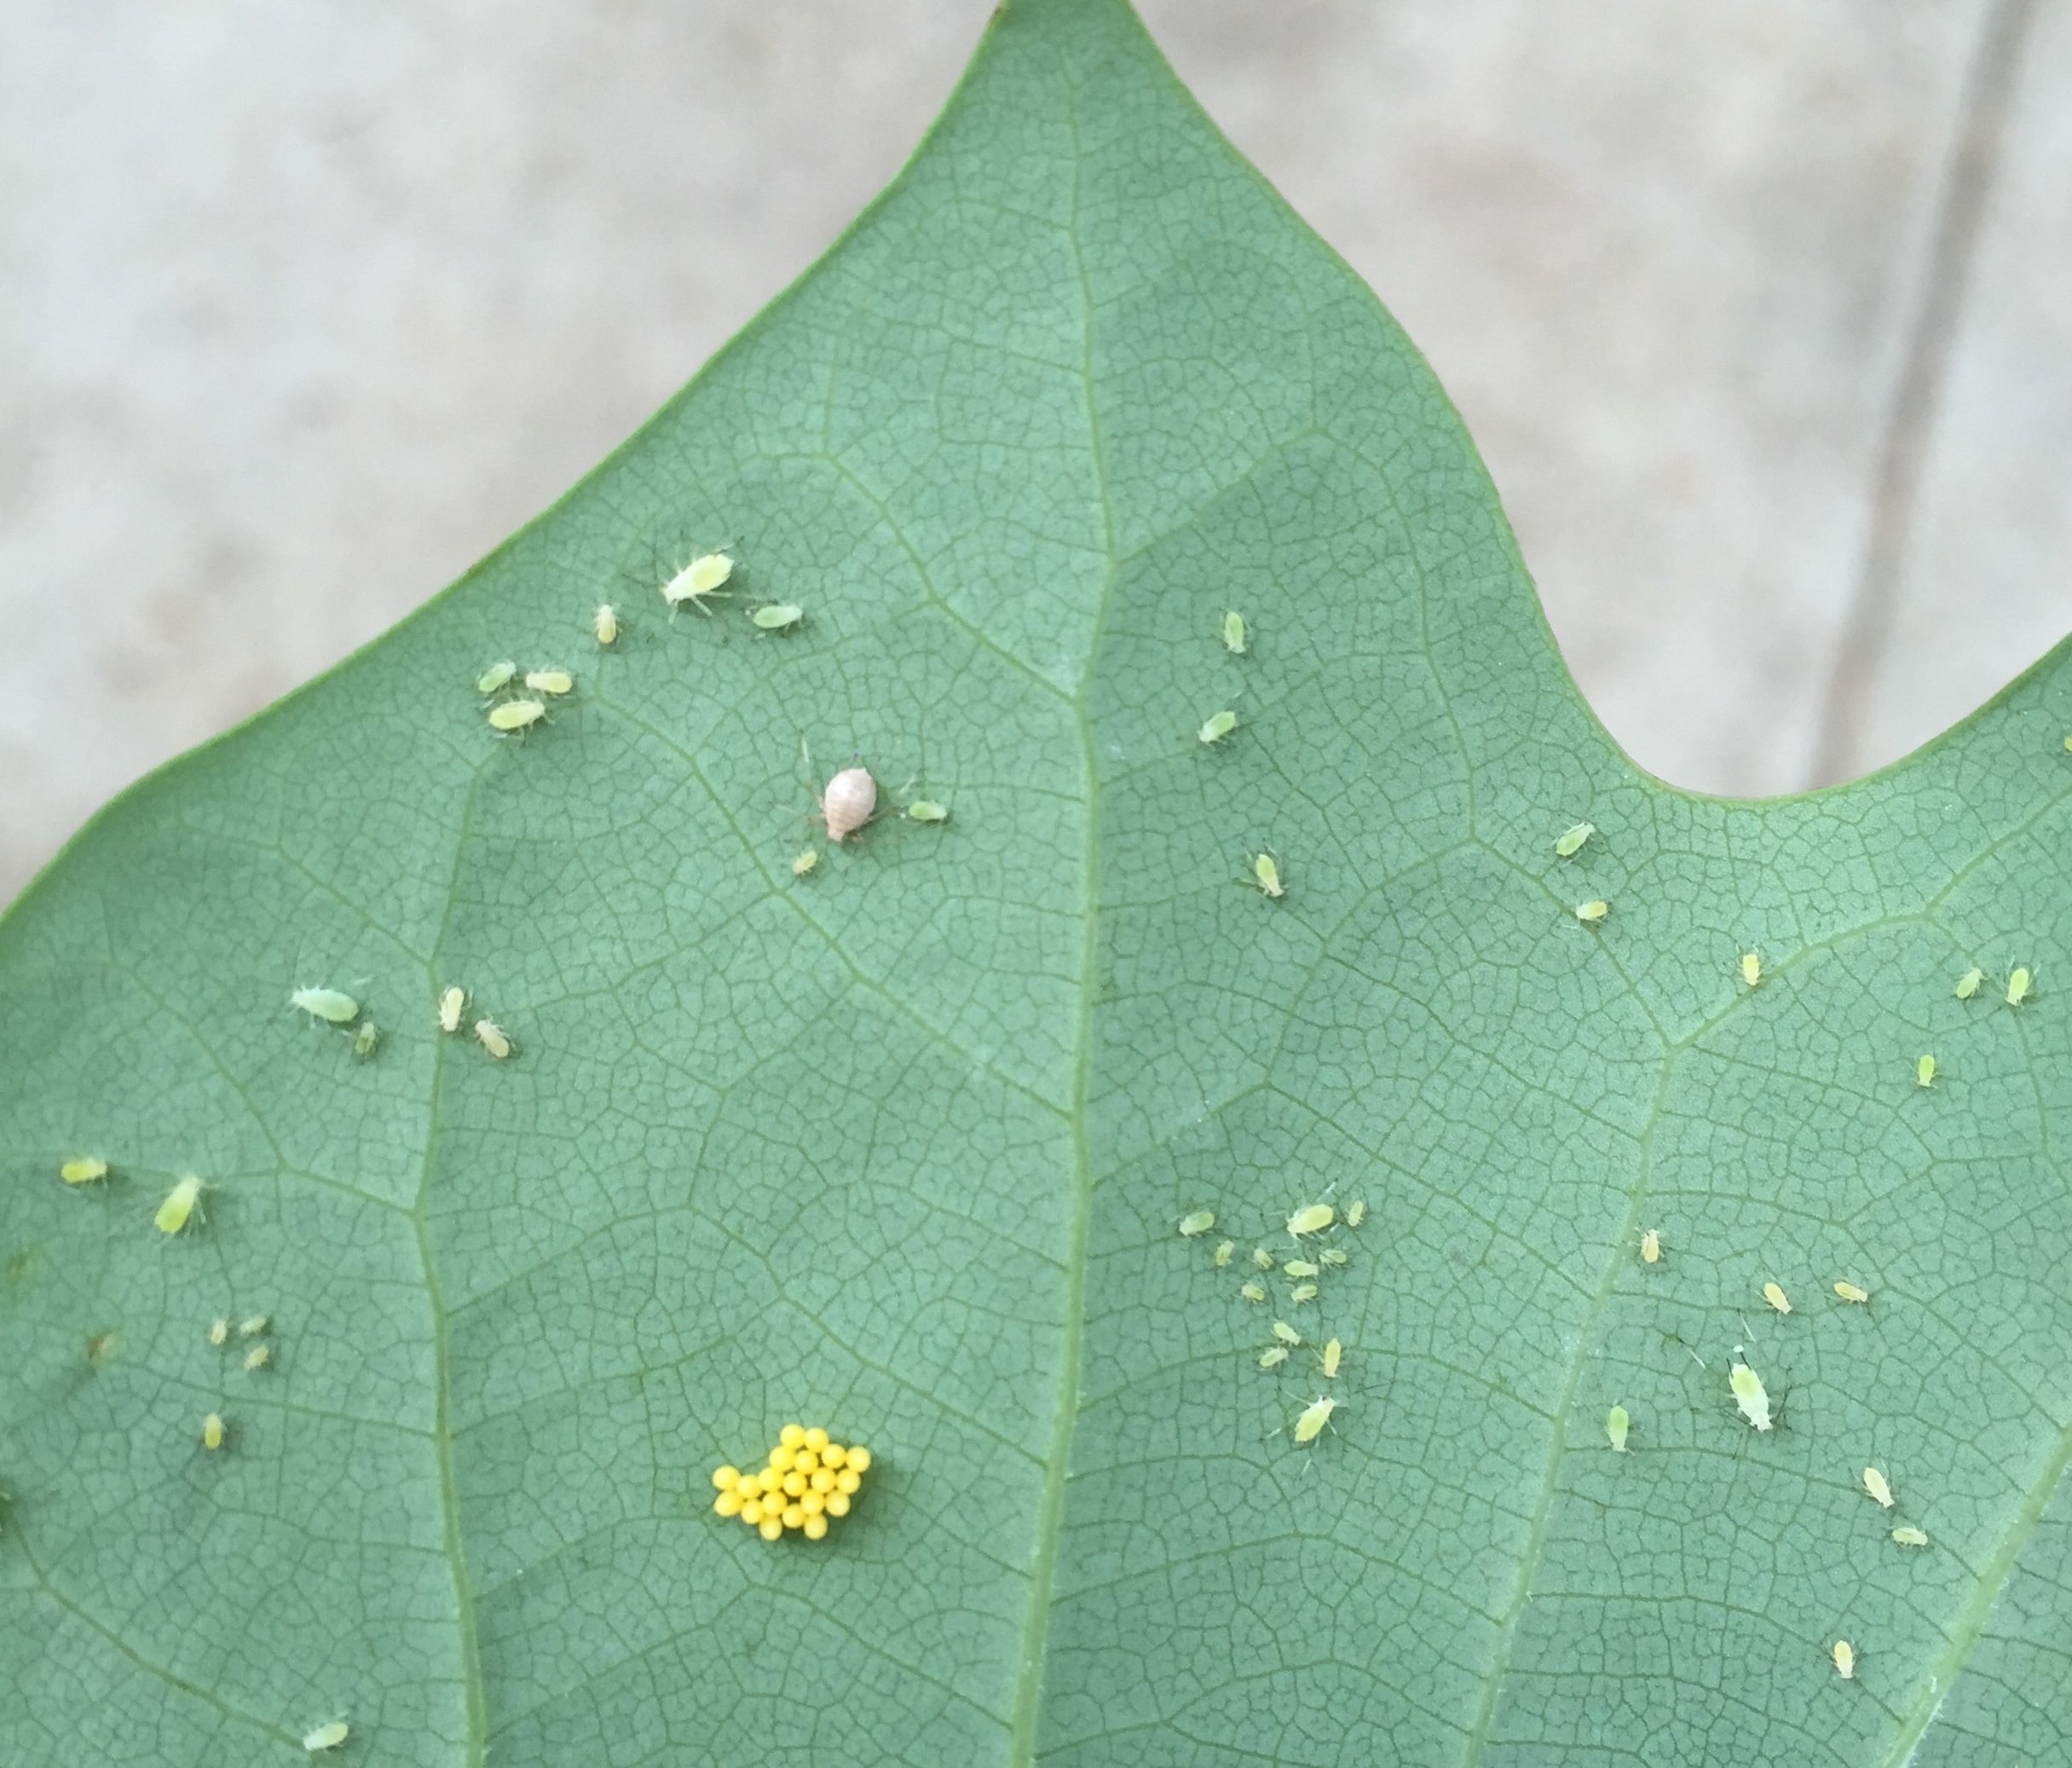 Tulip tree aphids with a brown parasitized aphid mummy and yellow lady beetle eggs. Photo: SD Frank